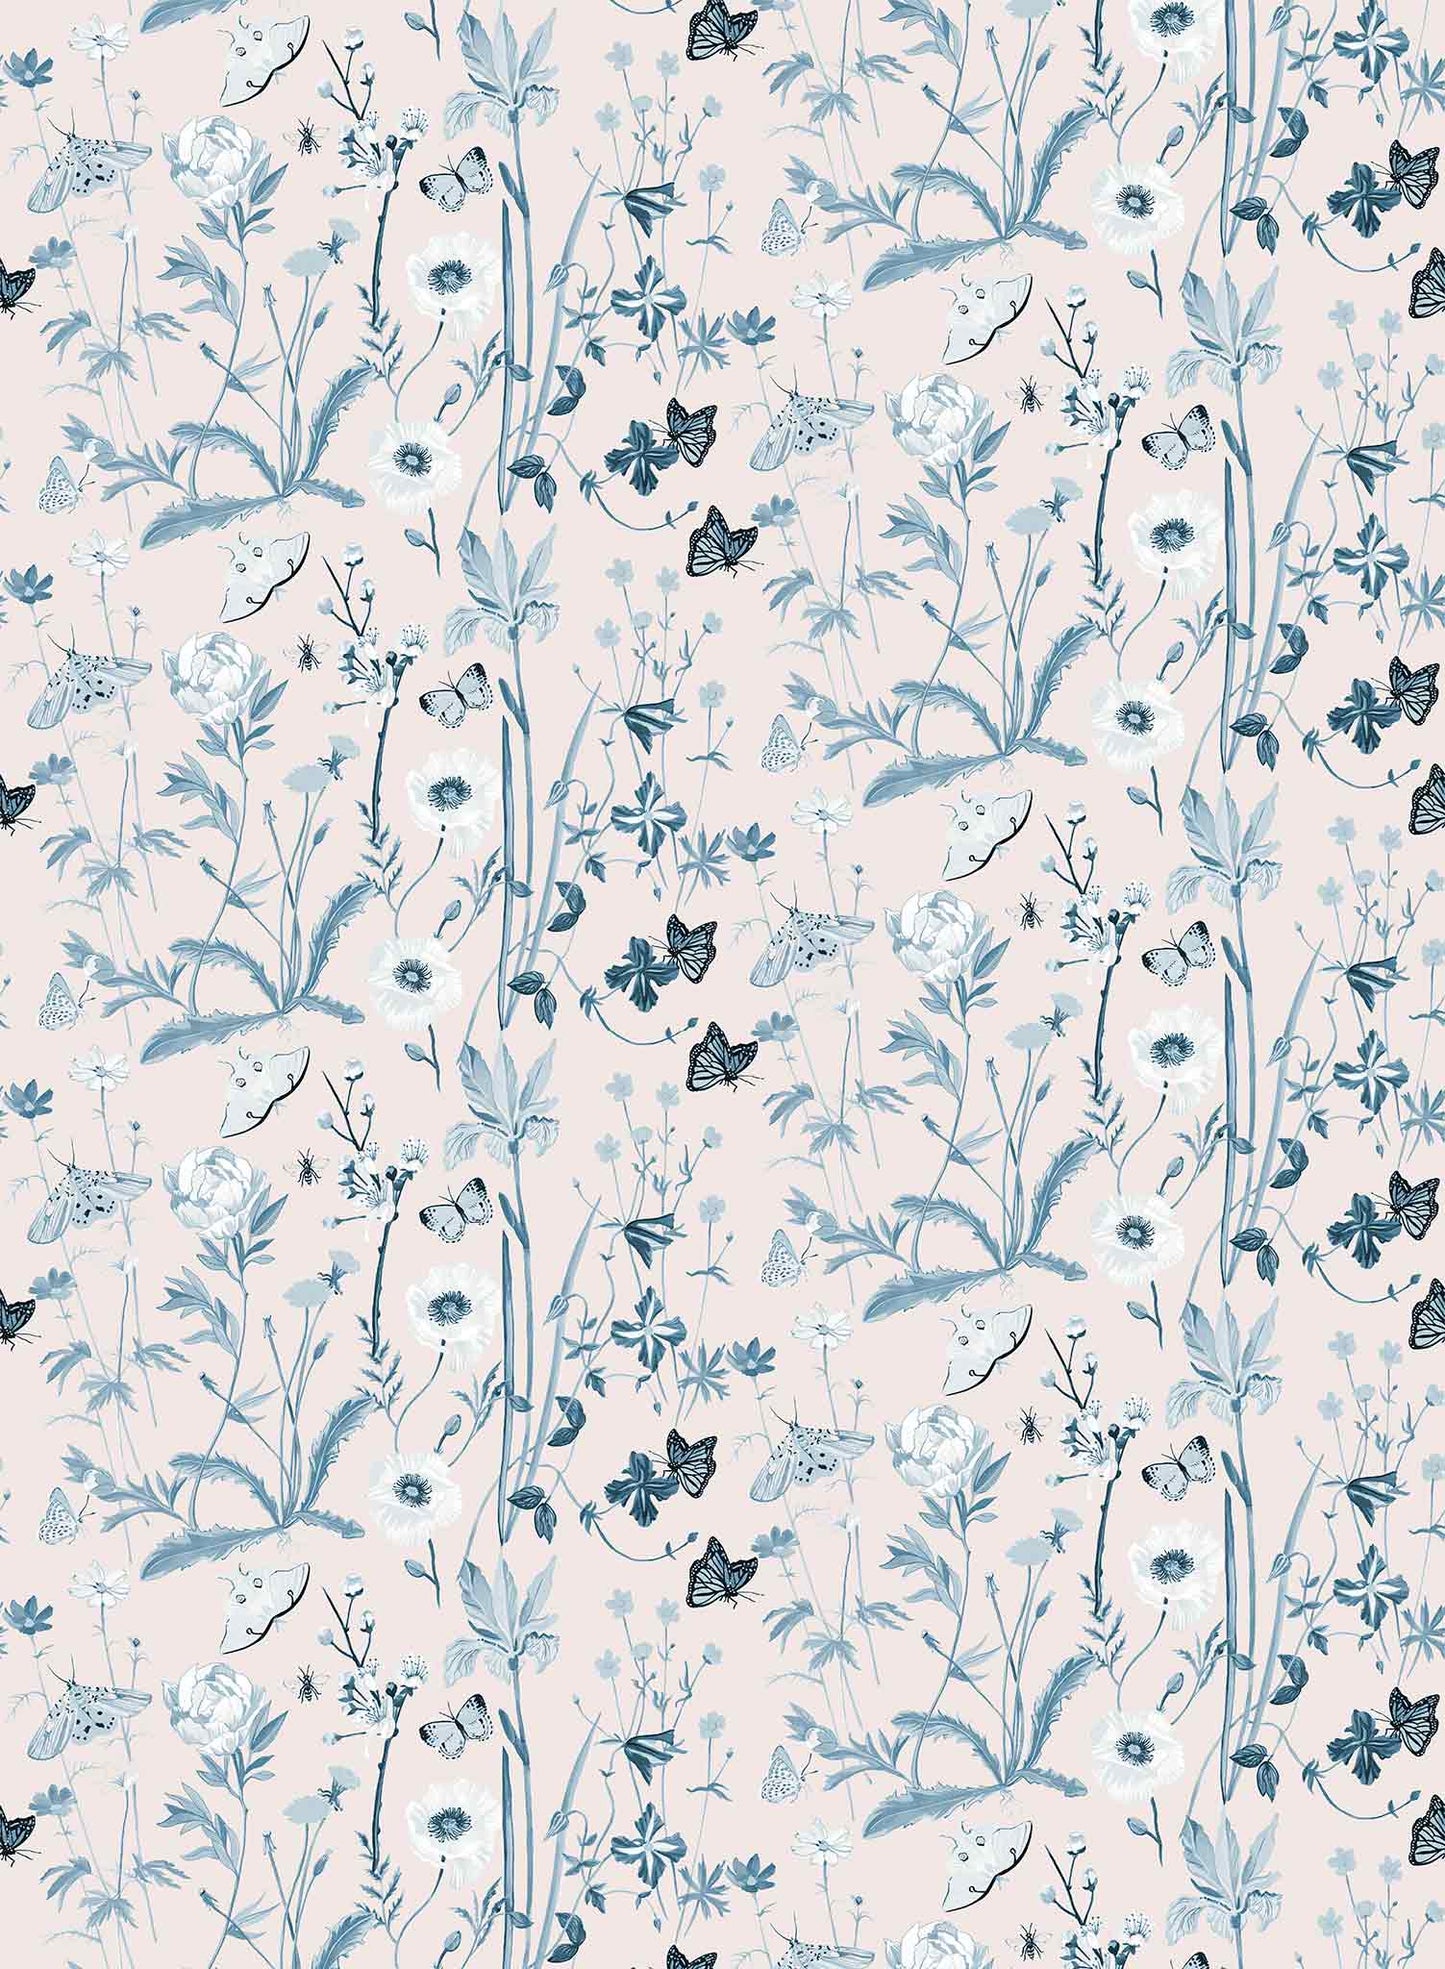 Midsommar is a minimalist wallpaper by Opposite Wall of a collection of butterflies and wildflowers.